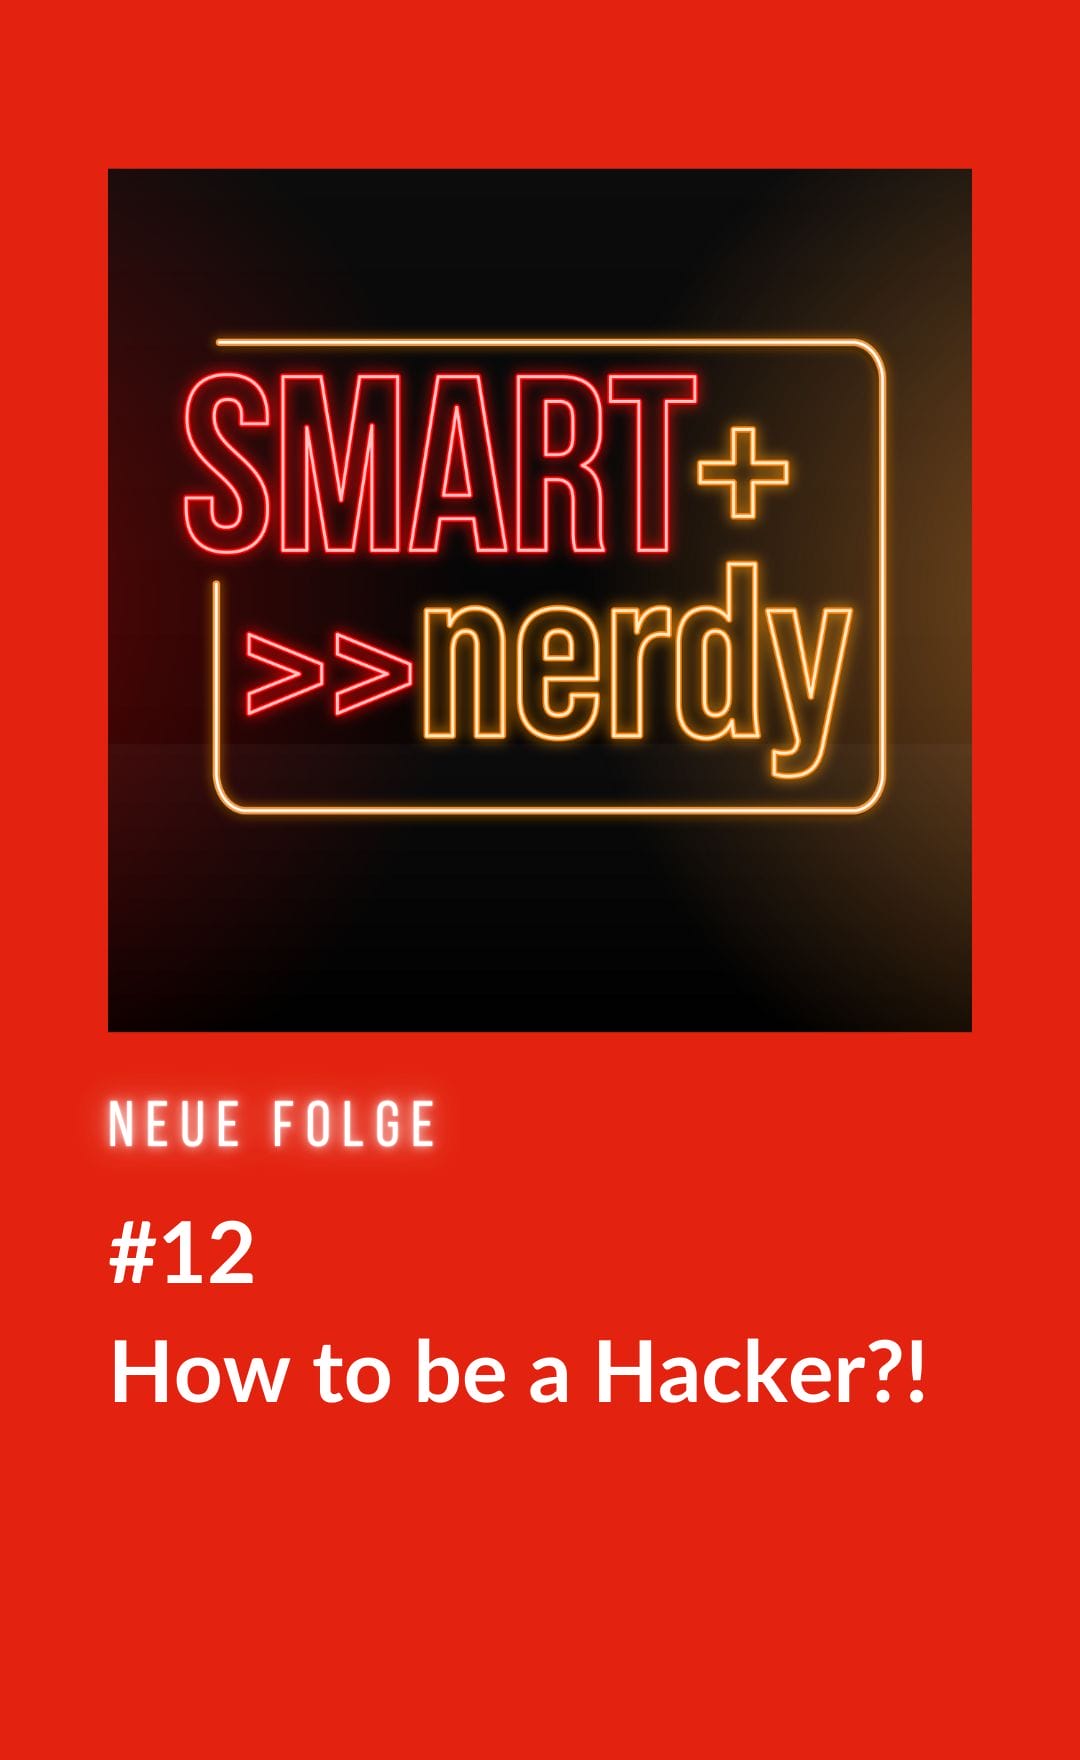 How to be a Hacker?!